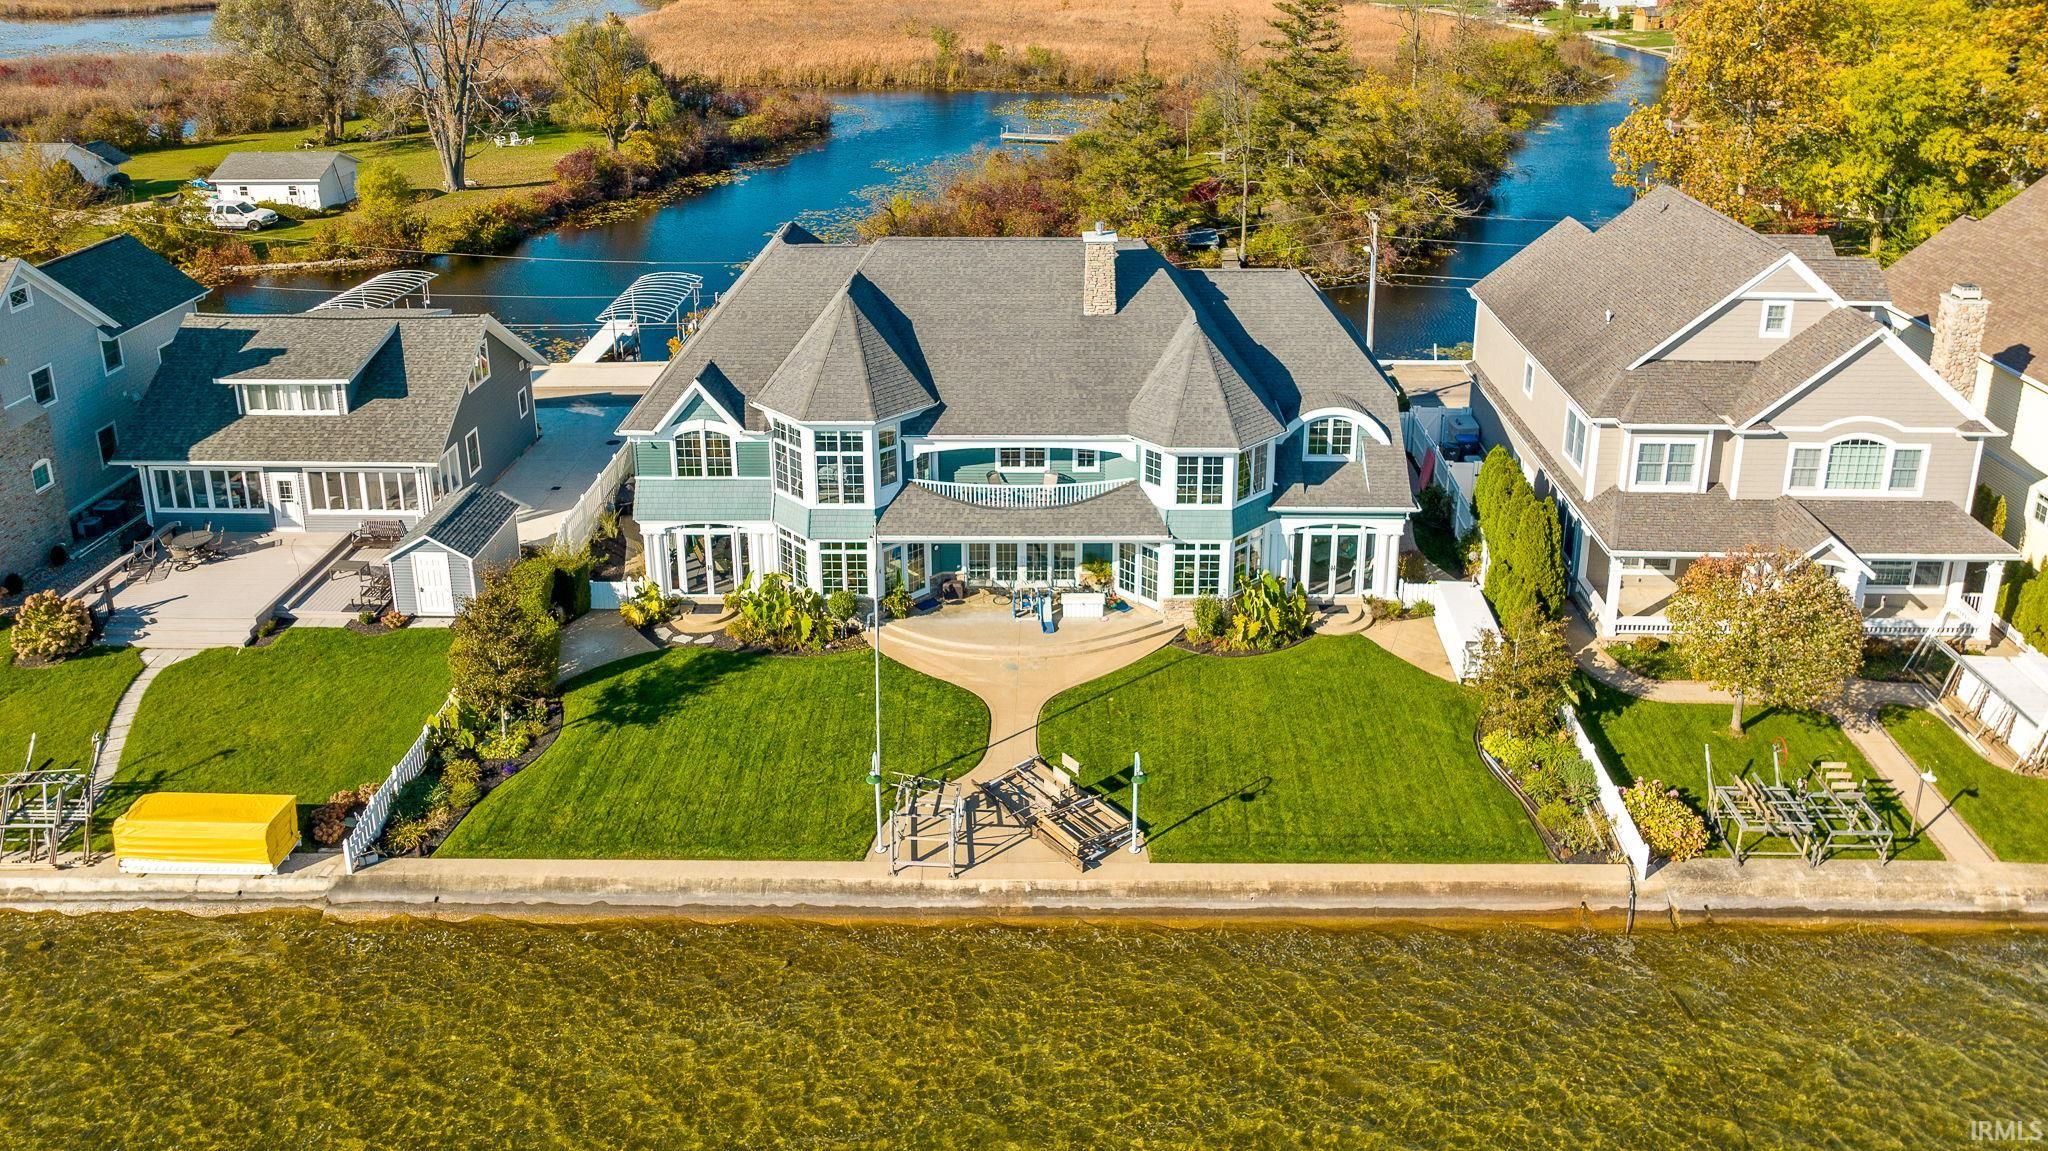 Welcome to this luxury residence set on Kale Island, nestled amidst the shimmering waters of Lake Wawasee, Syracuse, IN. Offering an impressive six Bedrooms, all with views of the water including Two Master Bedrooms with incredible Ensuite Bathrooms. This marvelous home also offers four full Bathrooms, and two sophisticated powder rooms. As you approach the private drive, a serene atmosphere welcomes you. This masterpiece is a TL Jackson built home on a double lot! With 100 feet of pristine lakefront and an additional 100 feet of channel frontage you can enjoy breathtaking views from every angle. With a sandy bottom lake bed, you can walk right in at the end of your pier!  The heart of this splendid home showcases a gourmet kitchen adorned with custom cherry cabinets that seamlessly blend with a rare blue granite countertop, an homage to the neighboring lake's hues. Crown molding enhances the property’s refined aesthetic of timeless elegance and modern comforts. Venture through the expansive living space where natural light dances off every surface and a fireplace surrounded by custom woodwork awaits you. On opposite sides of the residence, two magnificent screened in porches provide a harmonious balance of sunrise and sunset views each offering a unique vantage point to further enjoy the tranquil surroundings. The spacious three-car garage serves as both a haven for your prized vehicles and a testament to the property’s emphasis on functionality amidst luxury. Whether it’s the majestic water views, the meticulously crafted interiors, or the promise of serene lake living, this home beckons those with a penchant for the finer things in life. Dive into the epitome of lakeside luxury. Here on Kale Island, life isn't just lived; it's celebrated. Even with all the privacy this Estate offers, you are still only minutes from fine dining and shopping! Book your private viewing today and experience firsthand the magic of this Lake Wawasee jewel.